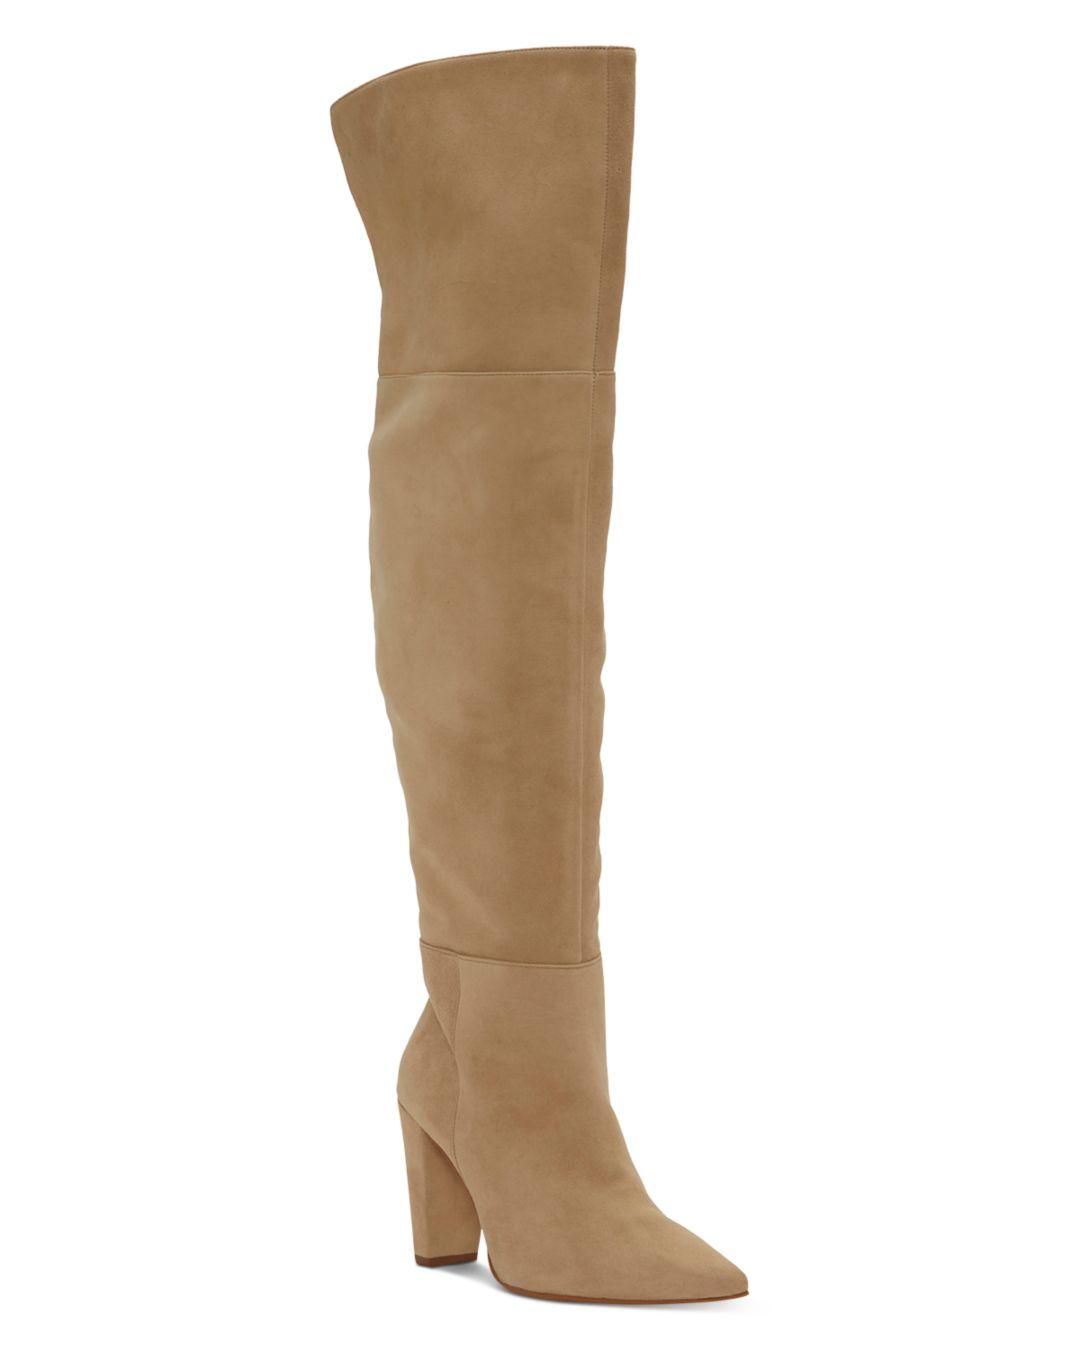 Vince Camuto Minnada High Heel Over The Knee Boots in Brown | Lyst